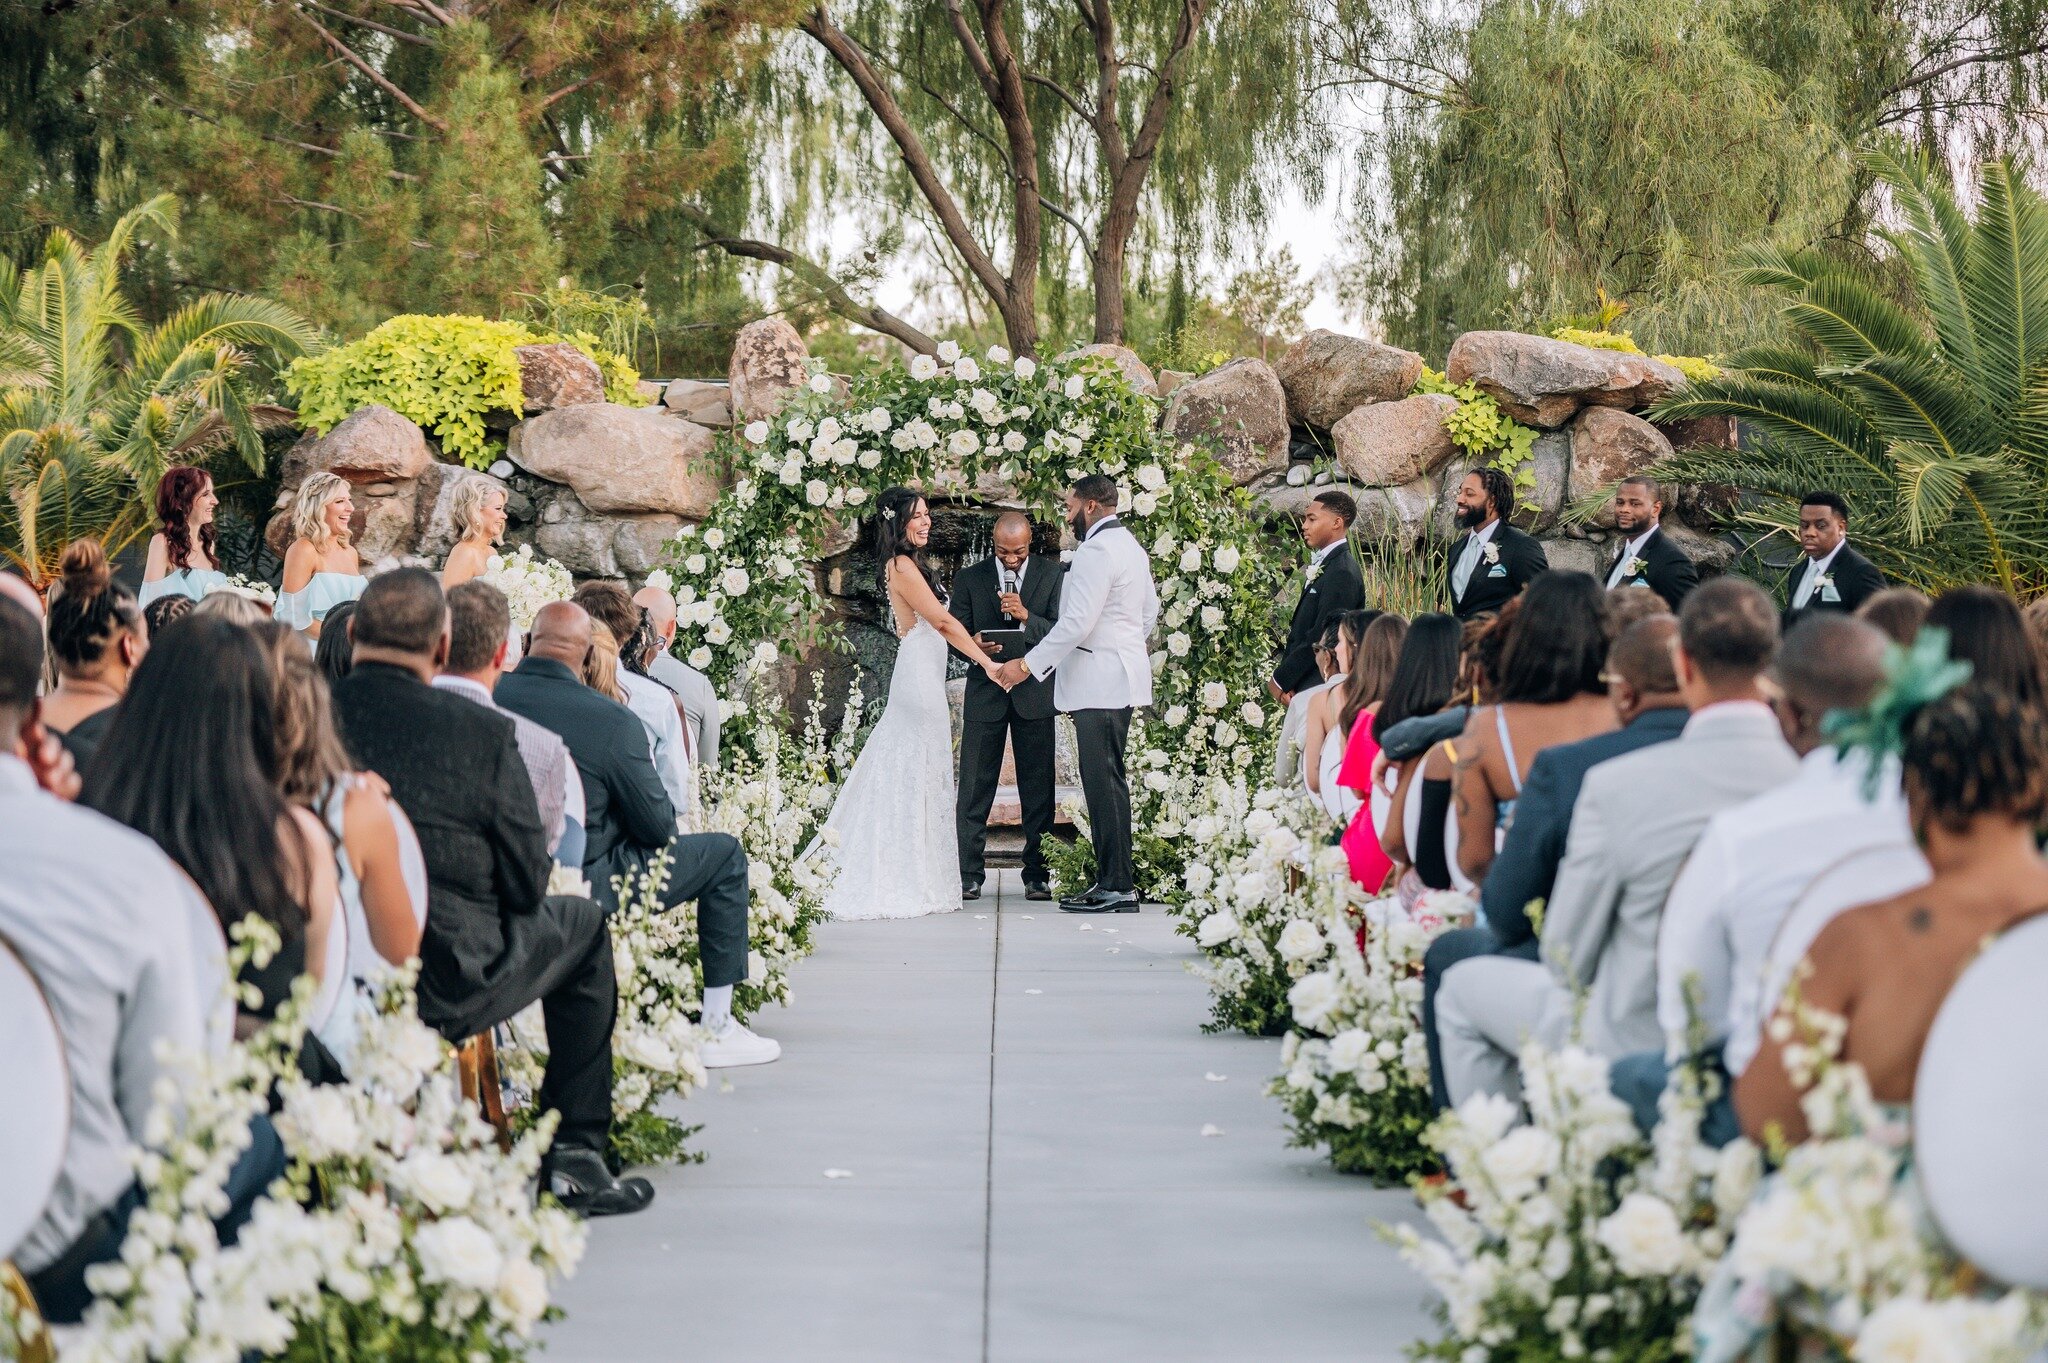 The joy after saying &quot;I DO&quot; 💍

Our waterfall backdrop with the combination of @saralunnfloral 's stunning lush arch, is a match made in heaven. The perfect frame for beautiful ceremony photography 📸

Venue: @lotushouseevents 
Coordination